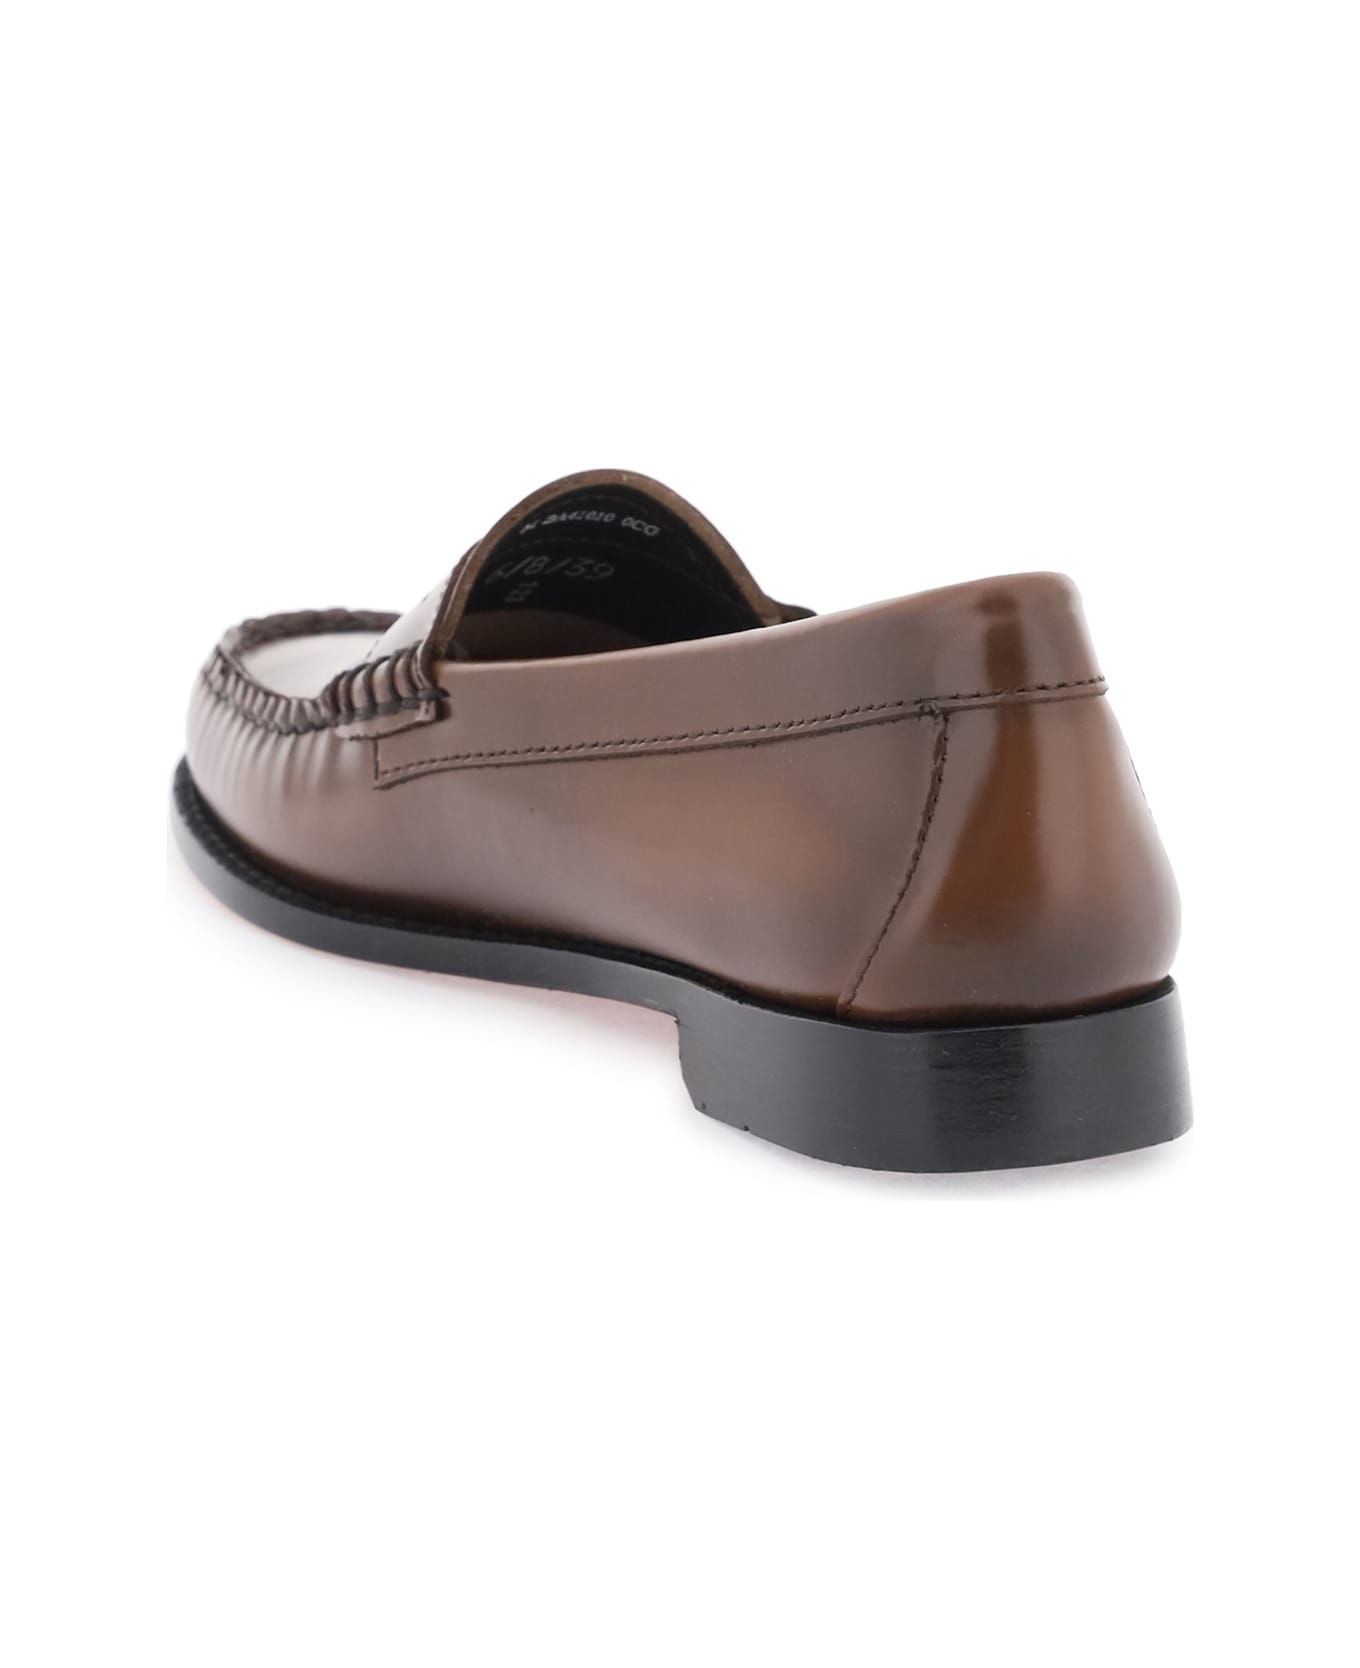 G.H.Bass & Co. Weejuns Penny Loafers - COGNAC (Brown) フラットシューズ